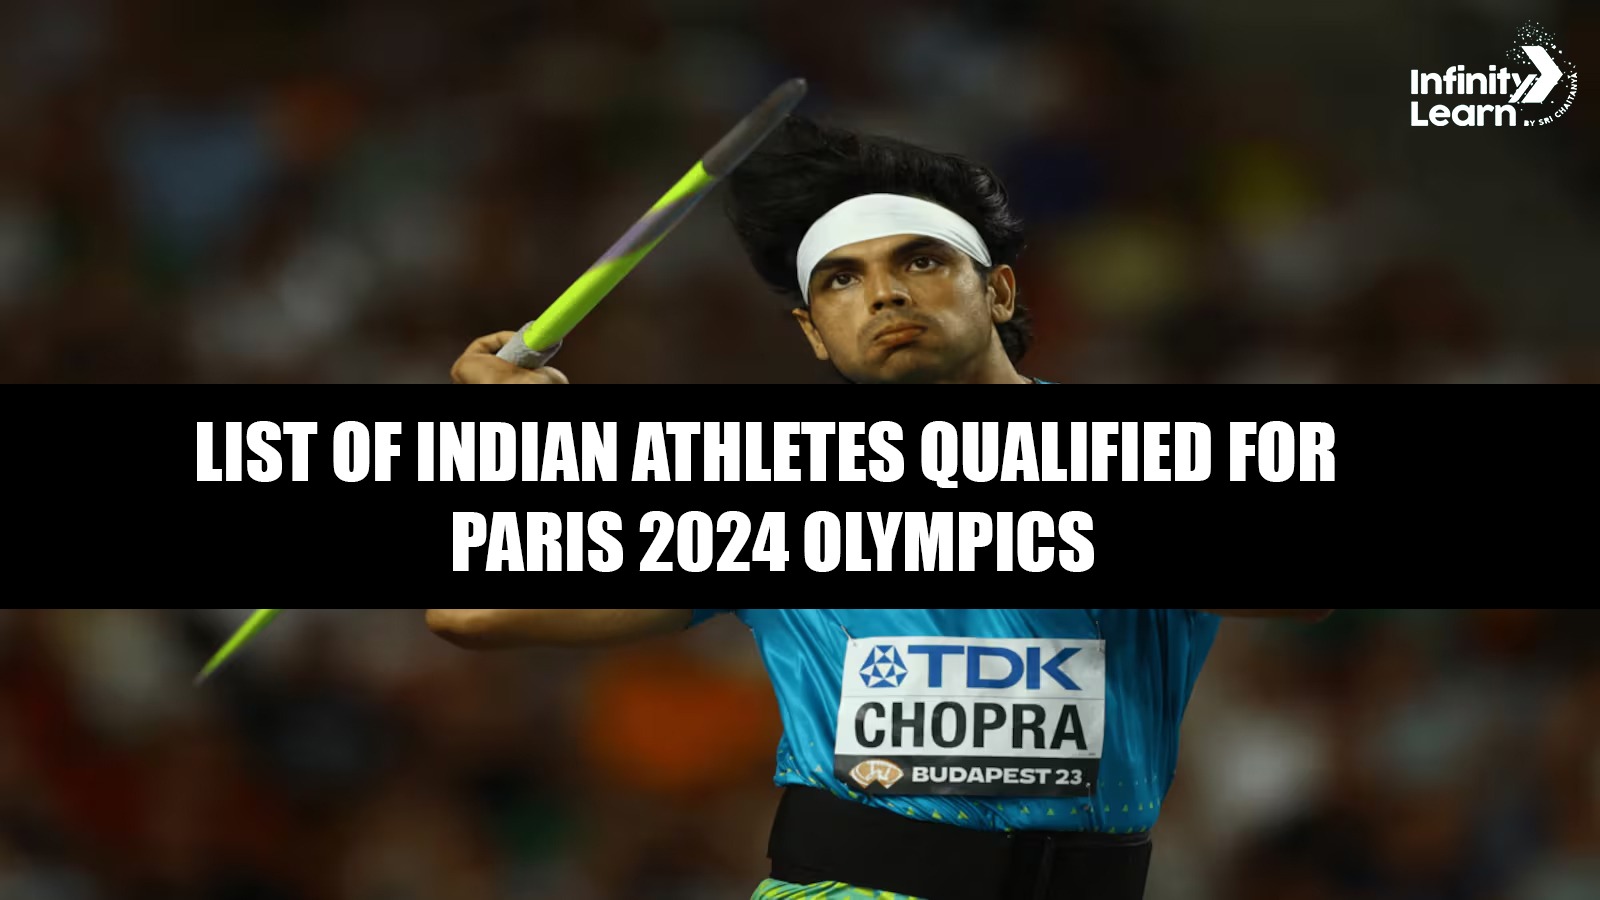 List of Indian Athletes Qualified for Paris 2024 Olympics 